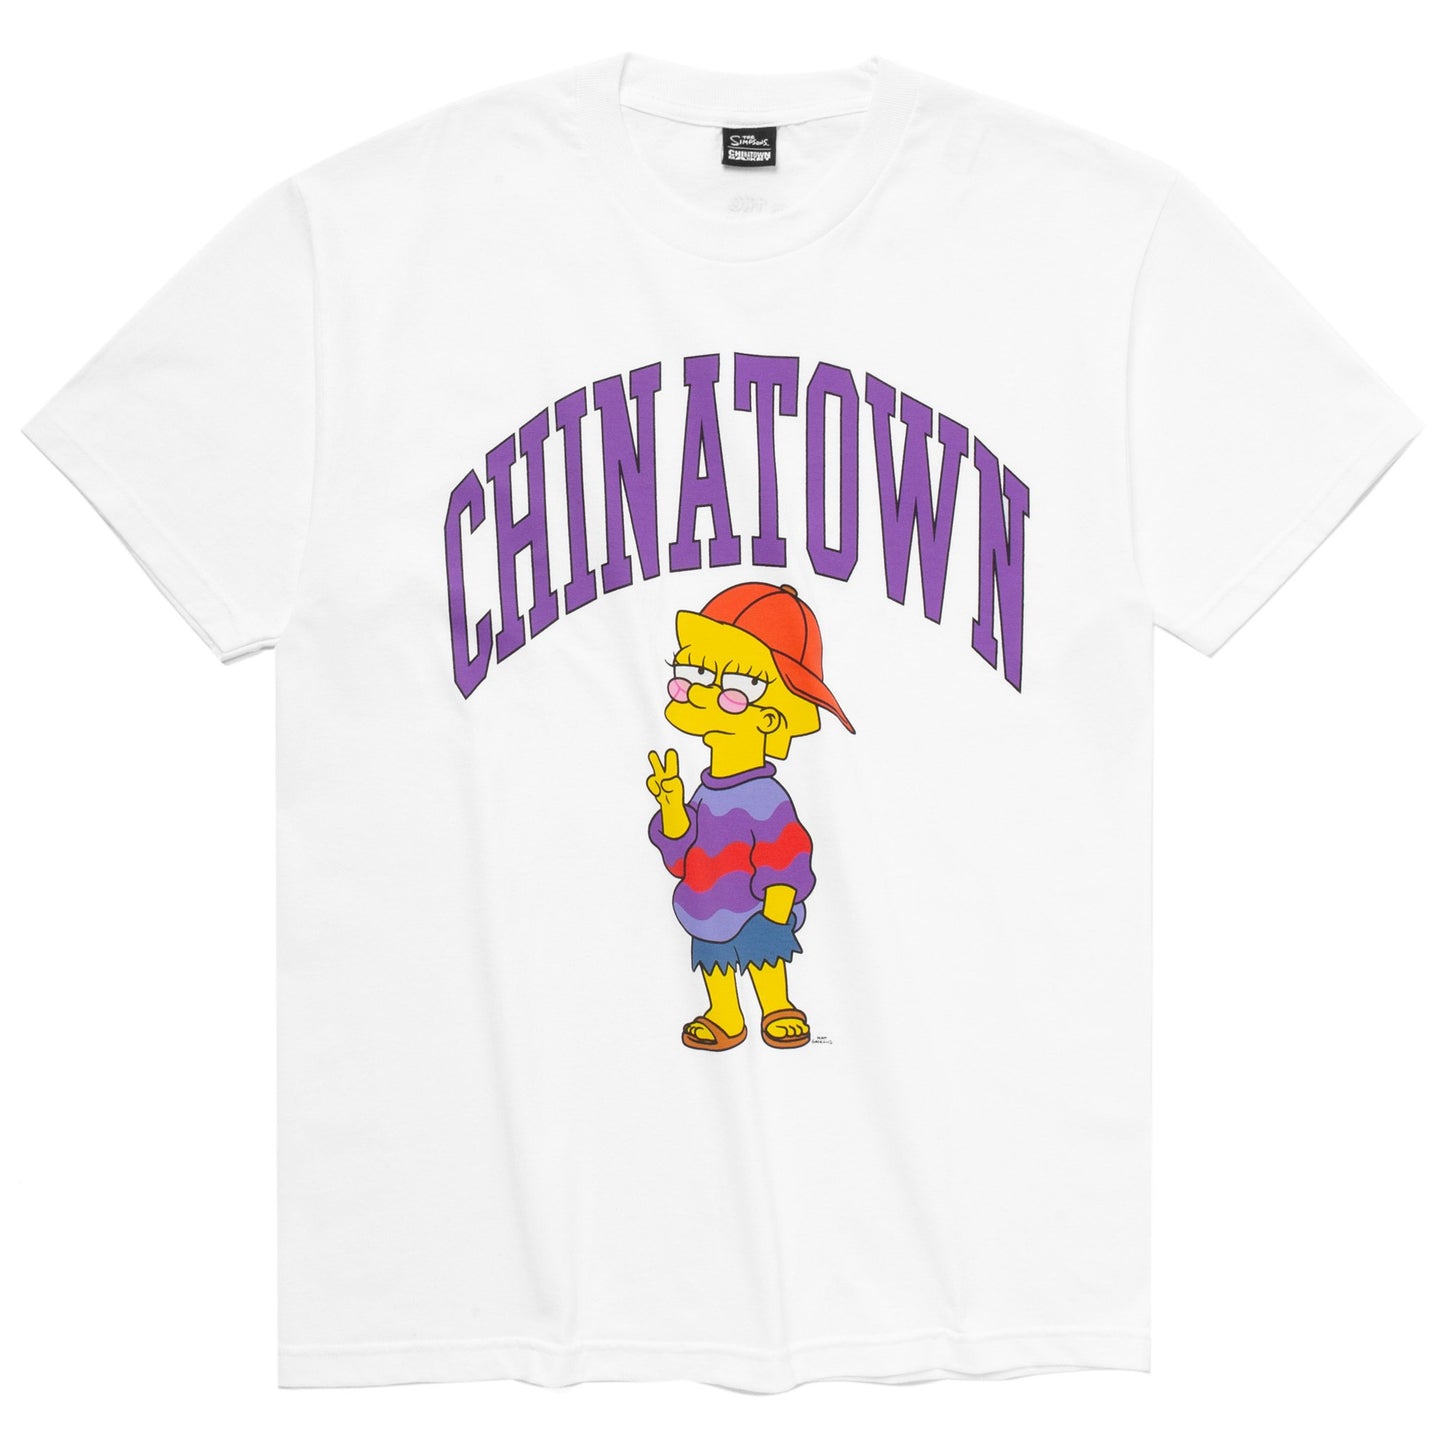 Chinatown Market x The Simpsons Like You Know Whatever Arc T-Shirt